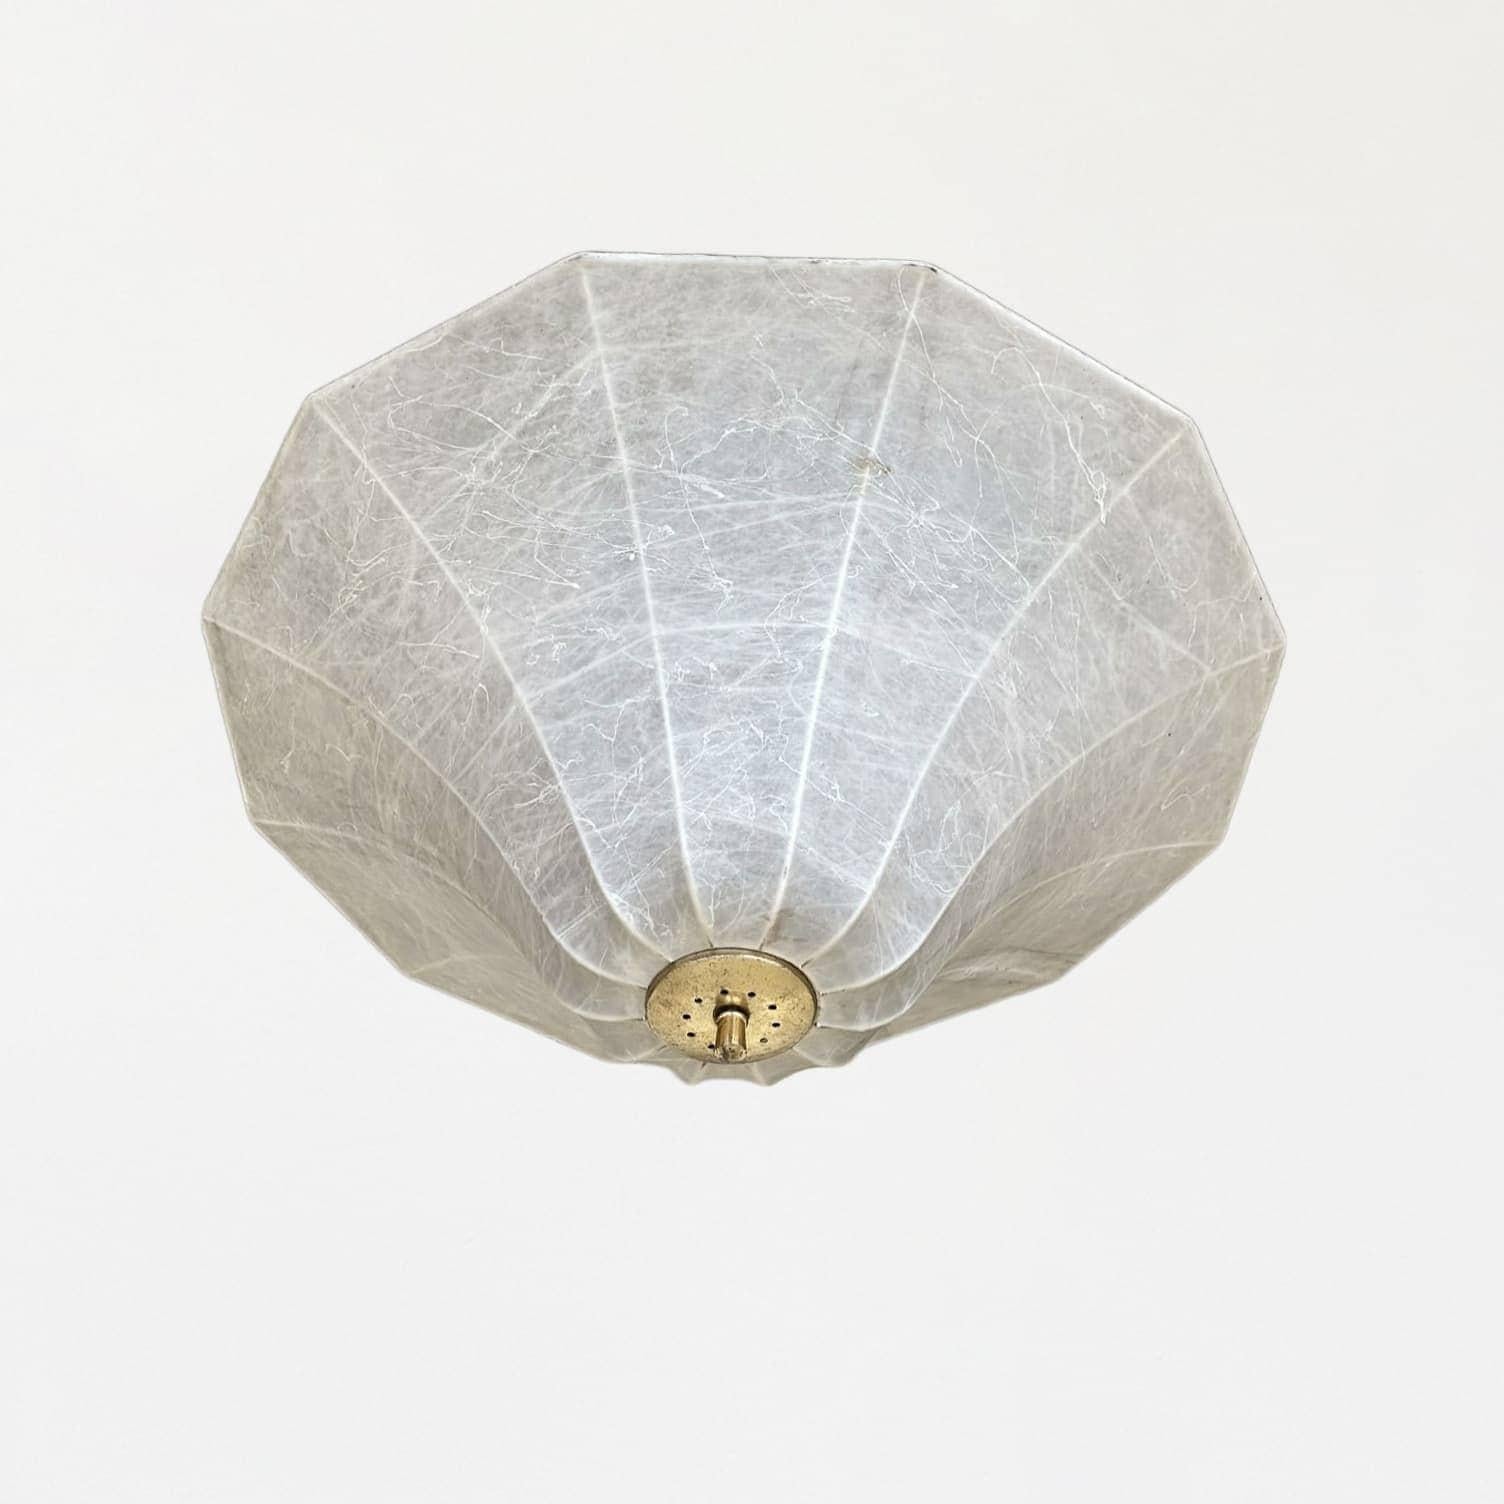 Incredible cocoon ceiling light by Achille & Pier Giacomo Castiglioni from Italy, 1960's. Unique shade in a creamy parchment resin with brass detail. Original dome resin shows nice age and some wear. New brass canopy and newly rewired with two